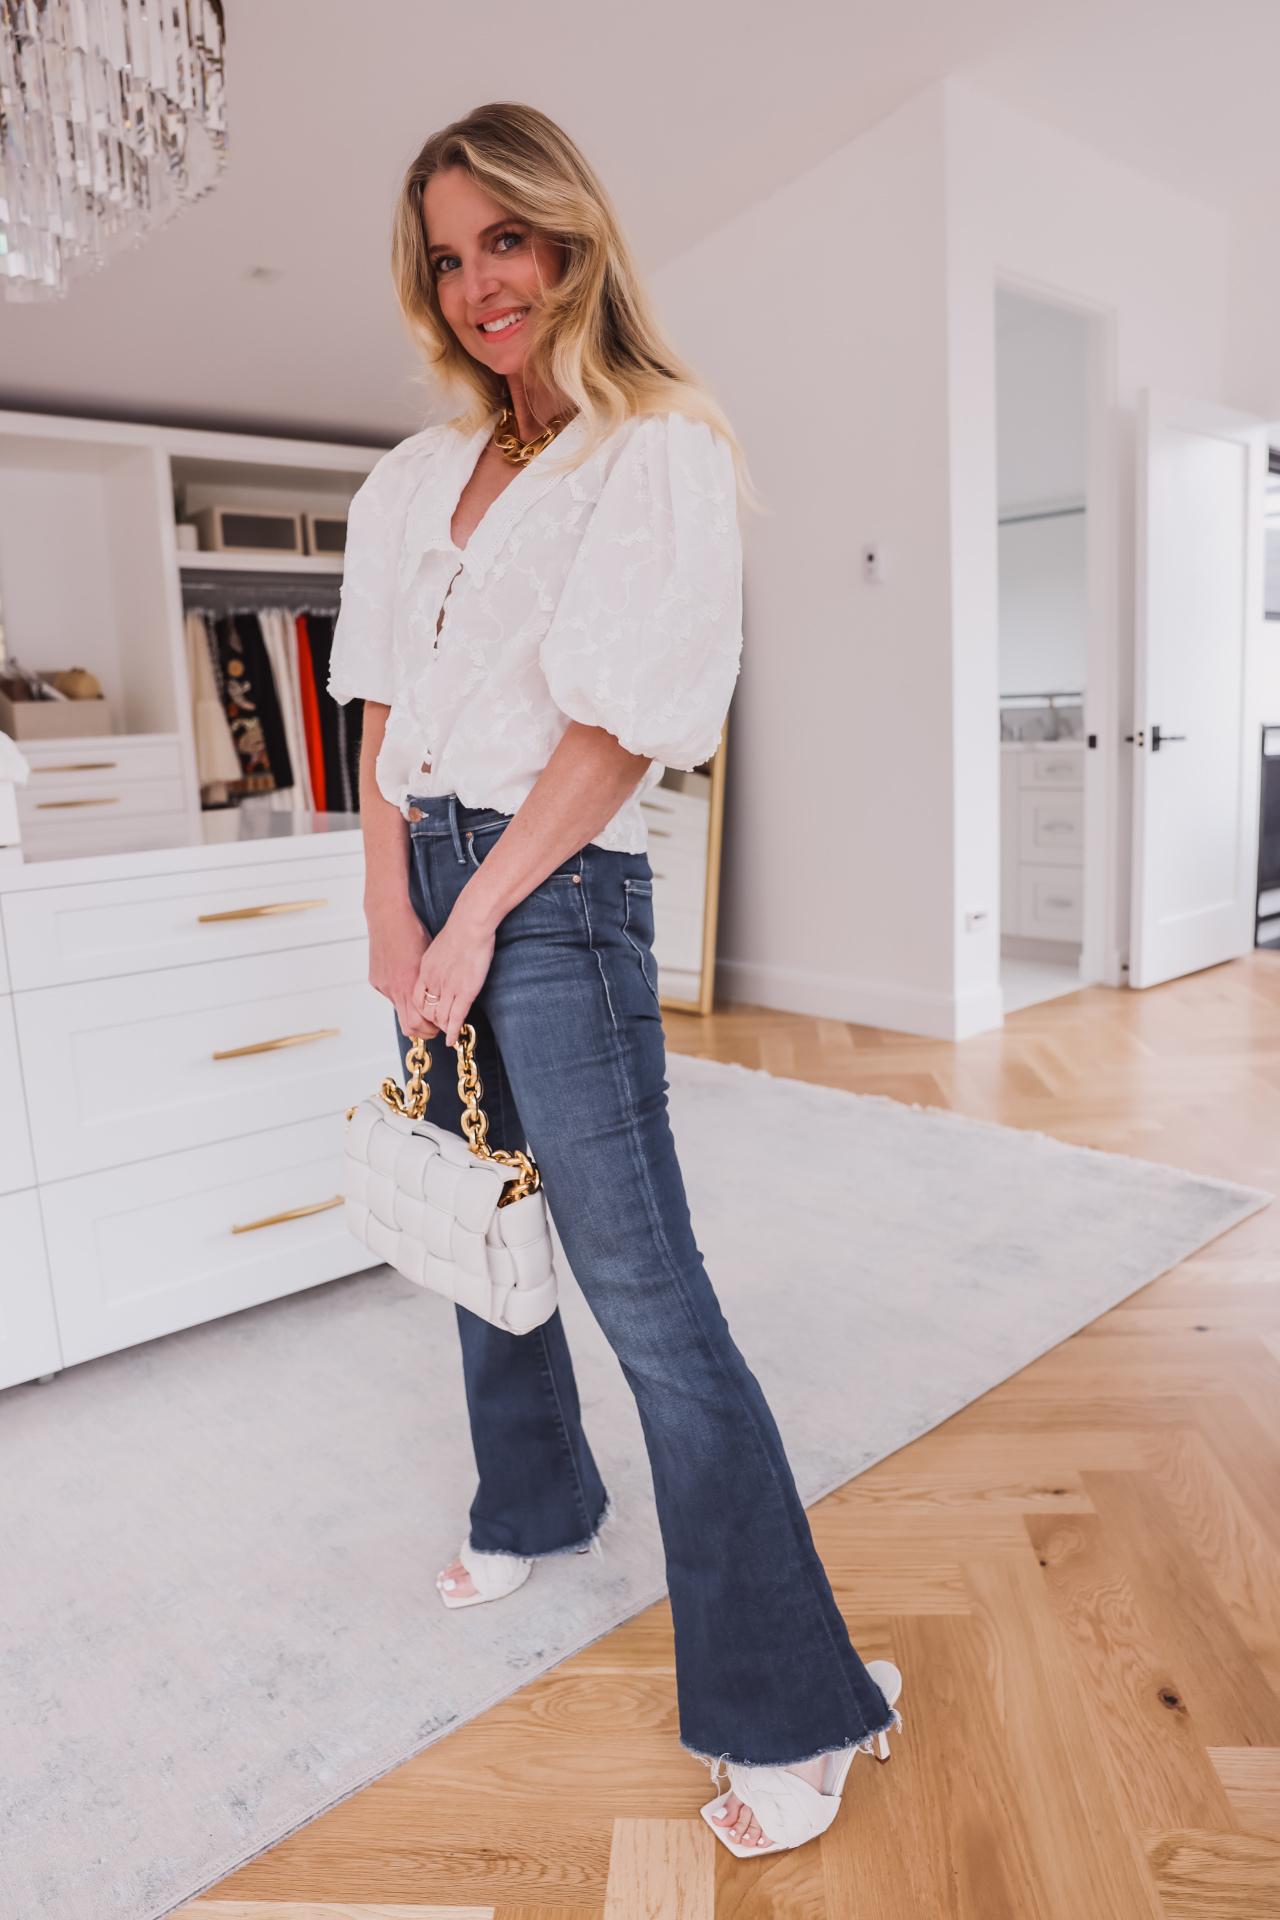 Bootcut Jeans & Heeled Sandals | How to Style Jeans and Heels